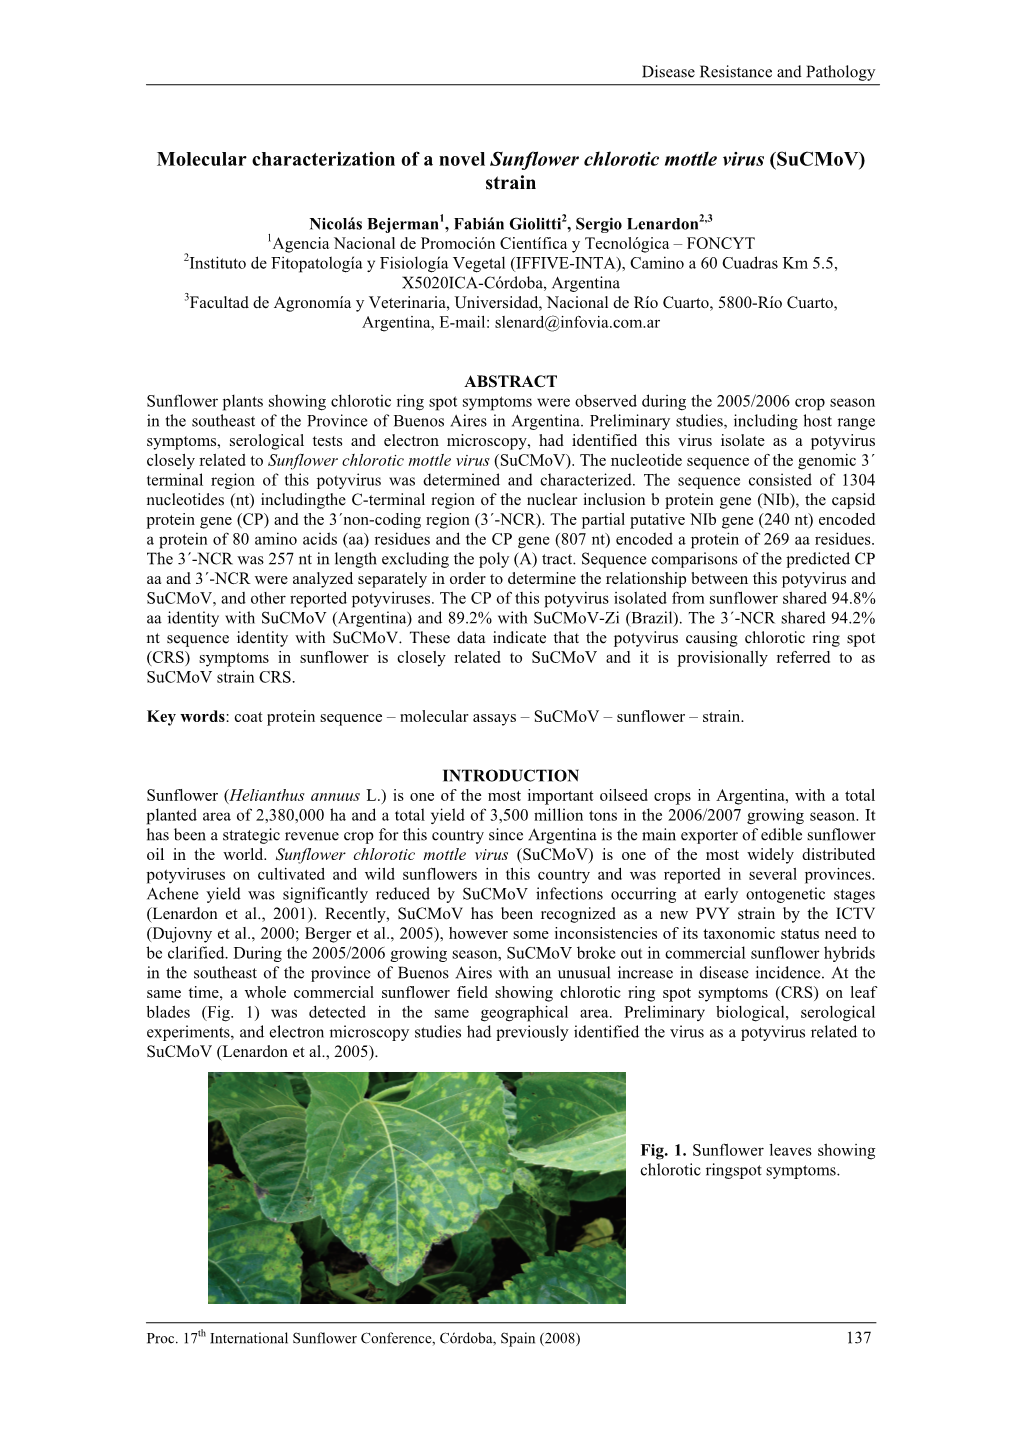 Phomopsis Control in Sunflower Using Products of Biogenic Origin